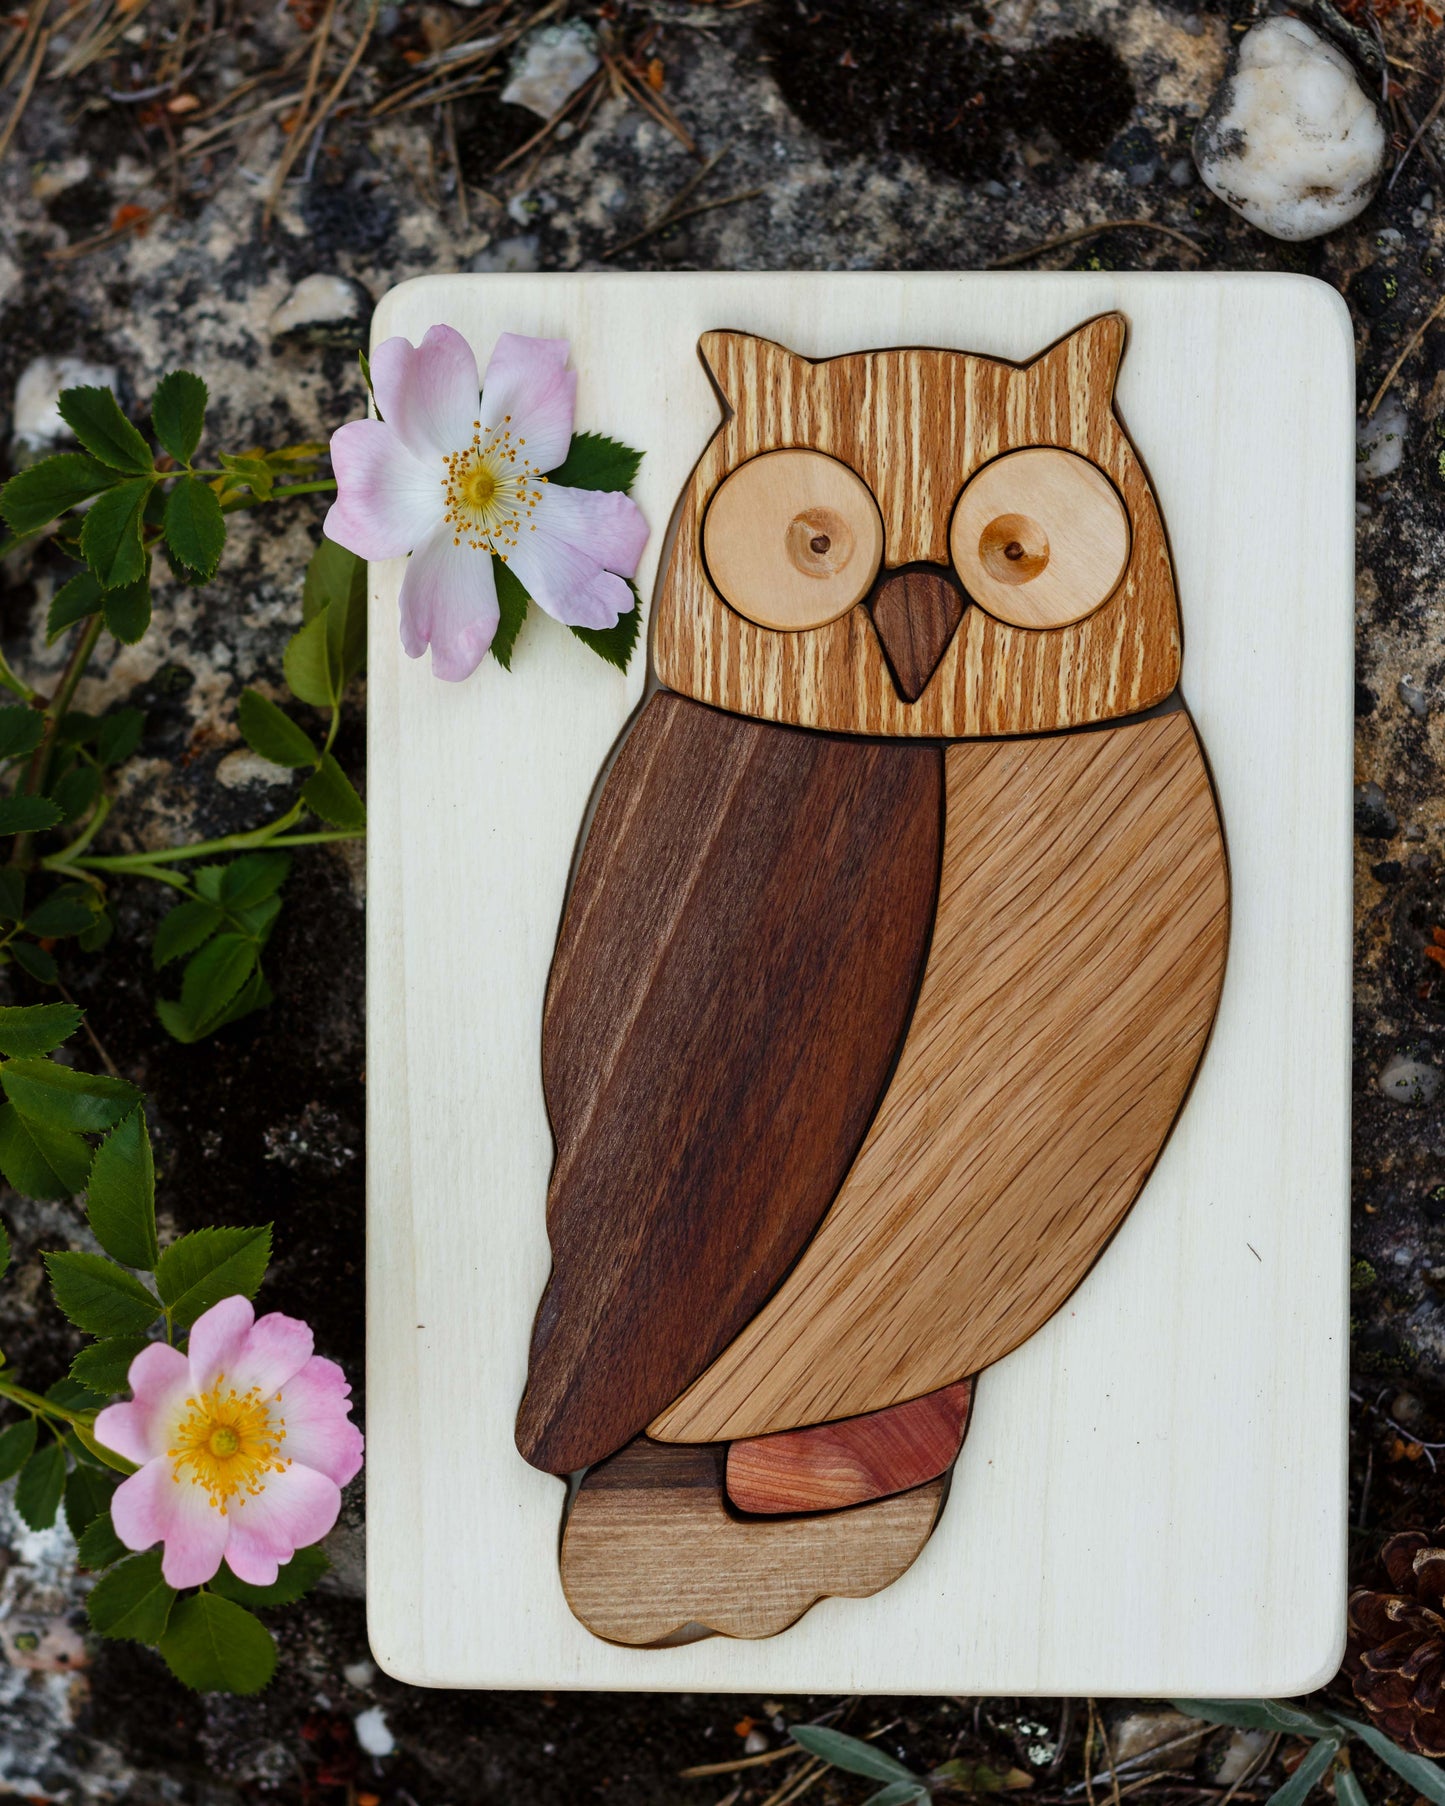 Gorgeous owl wooden toy puzzle from Cocoletes